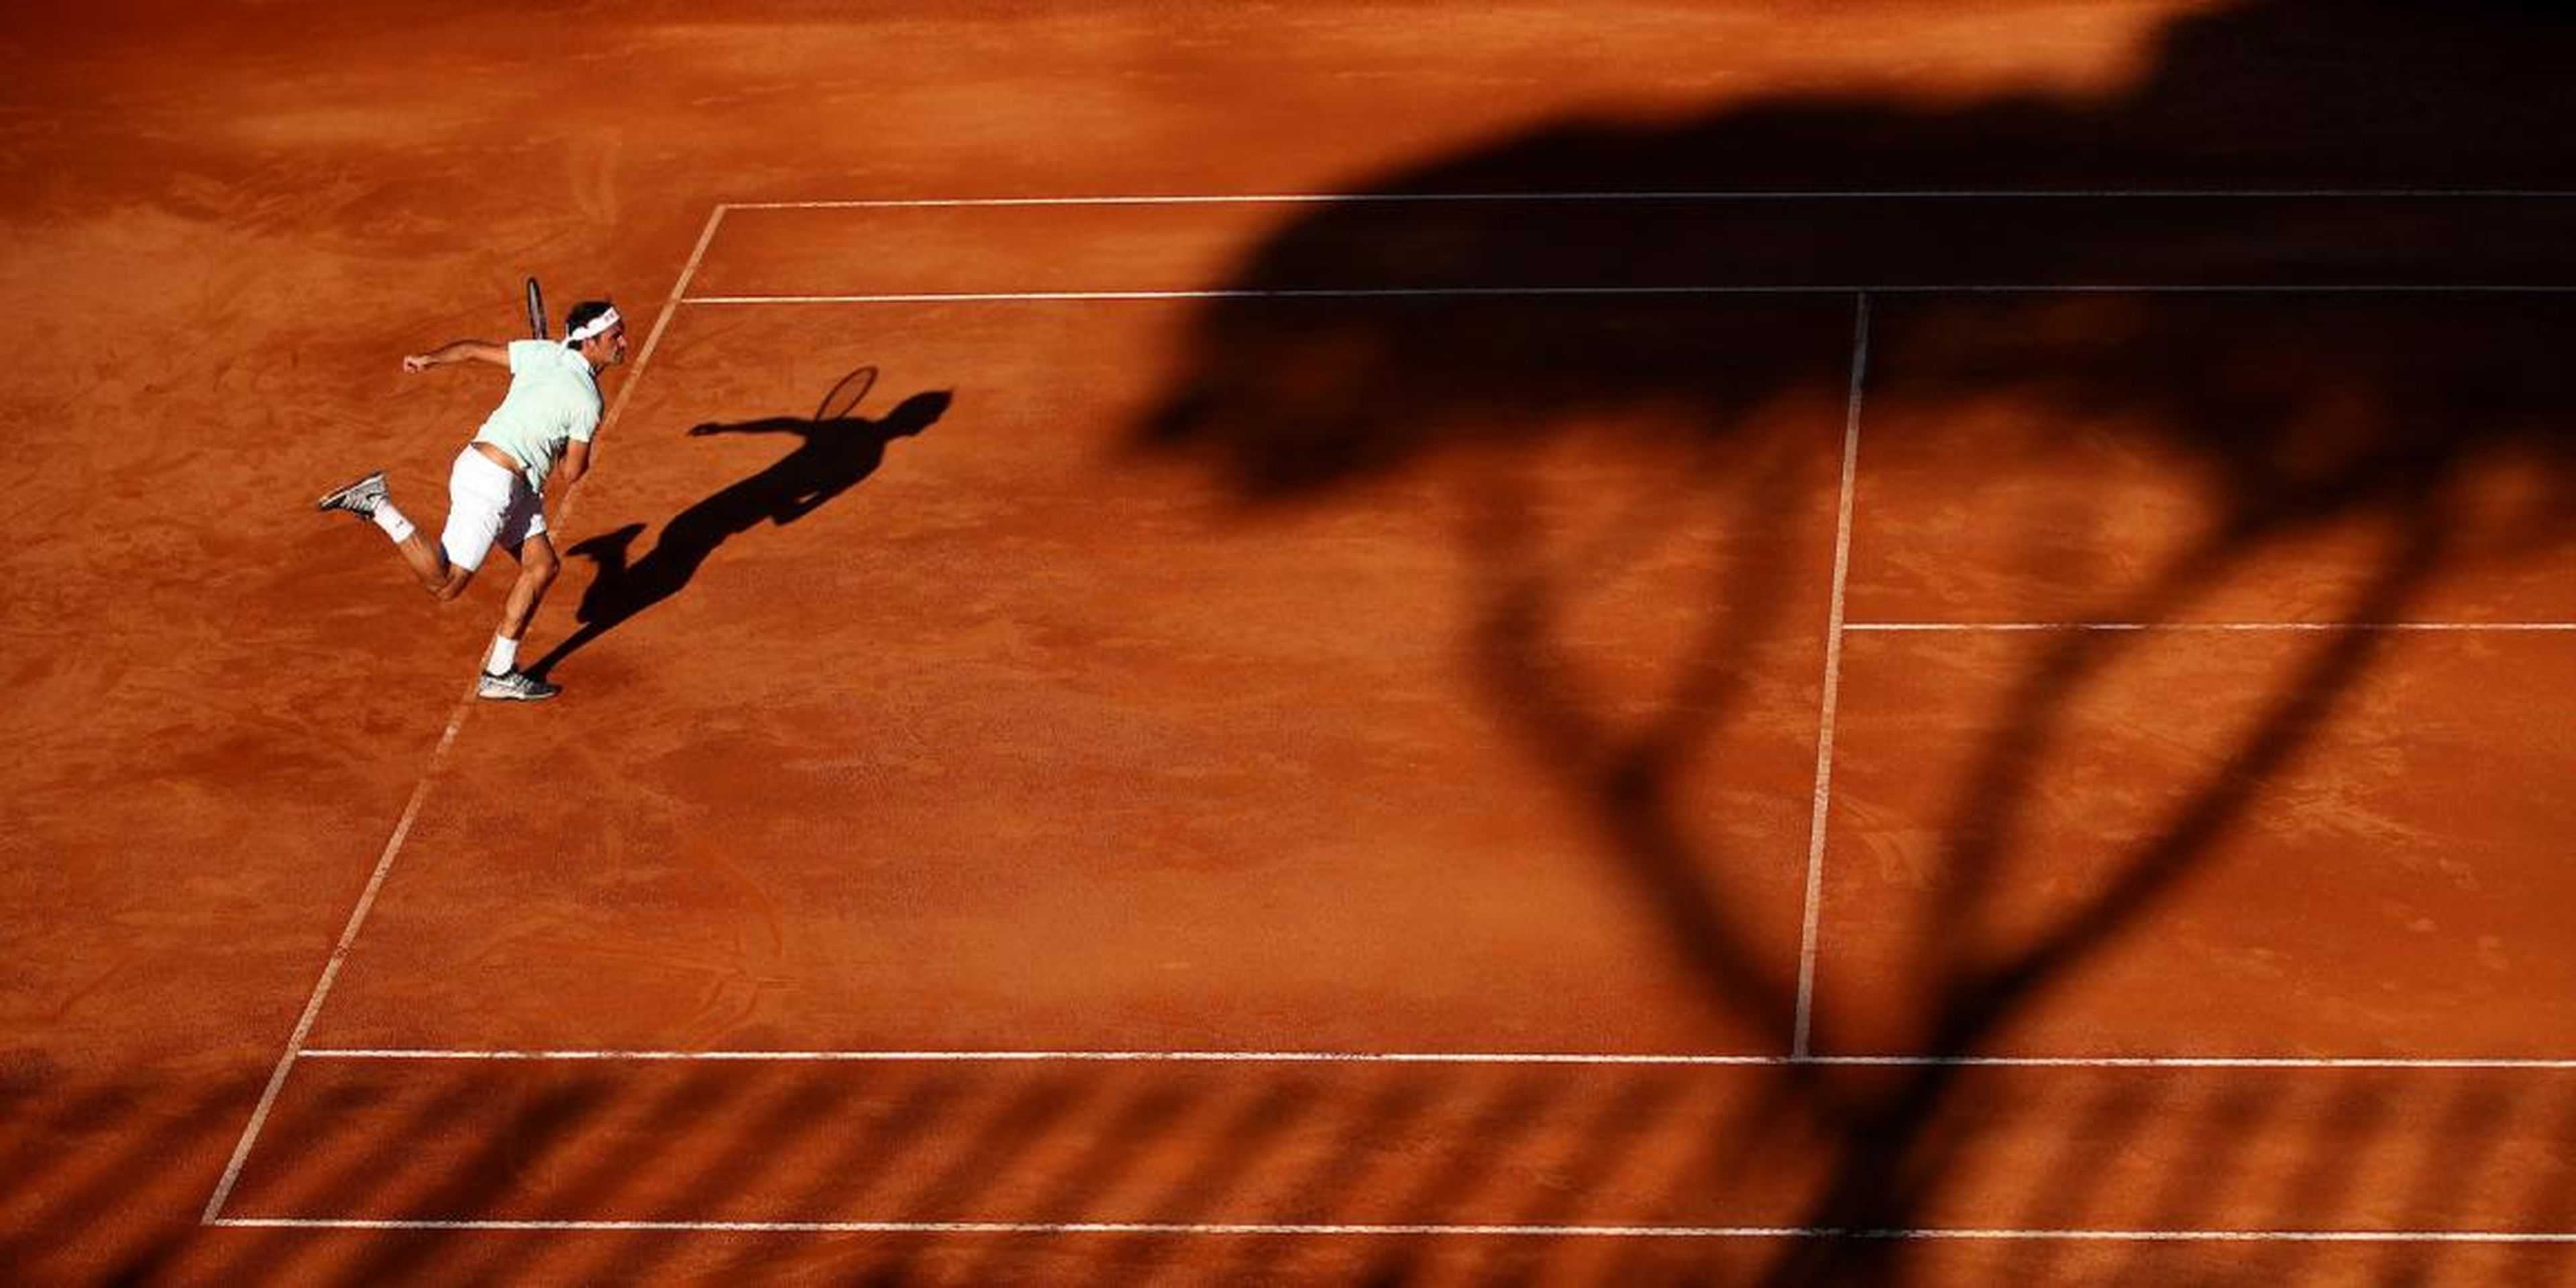 24 gorgeous photos of Roger Federer playing tennis